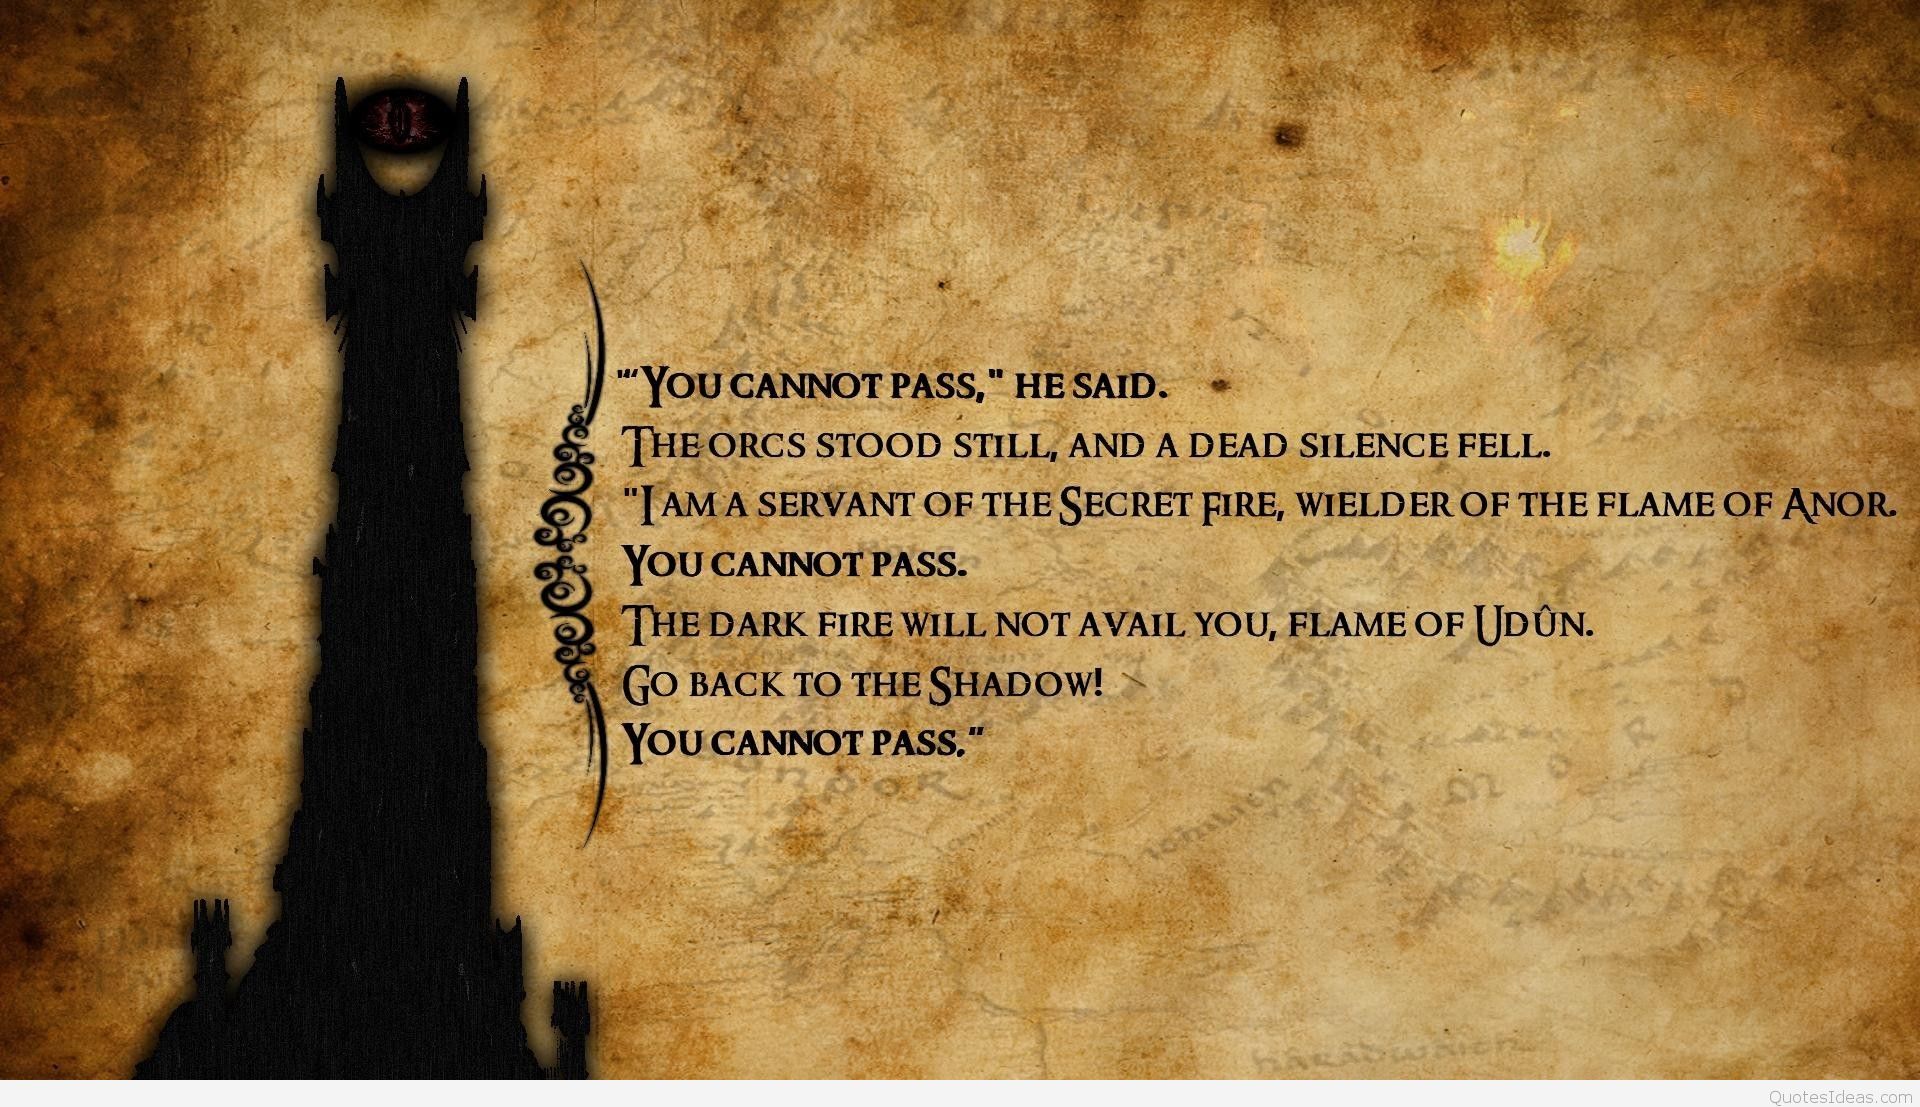 Top quotes from Lord of the rings with images & wallpapers